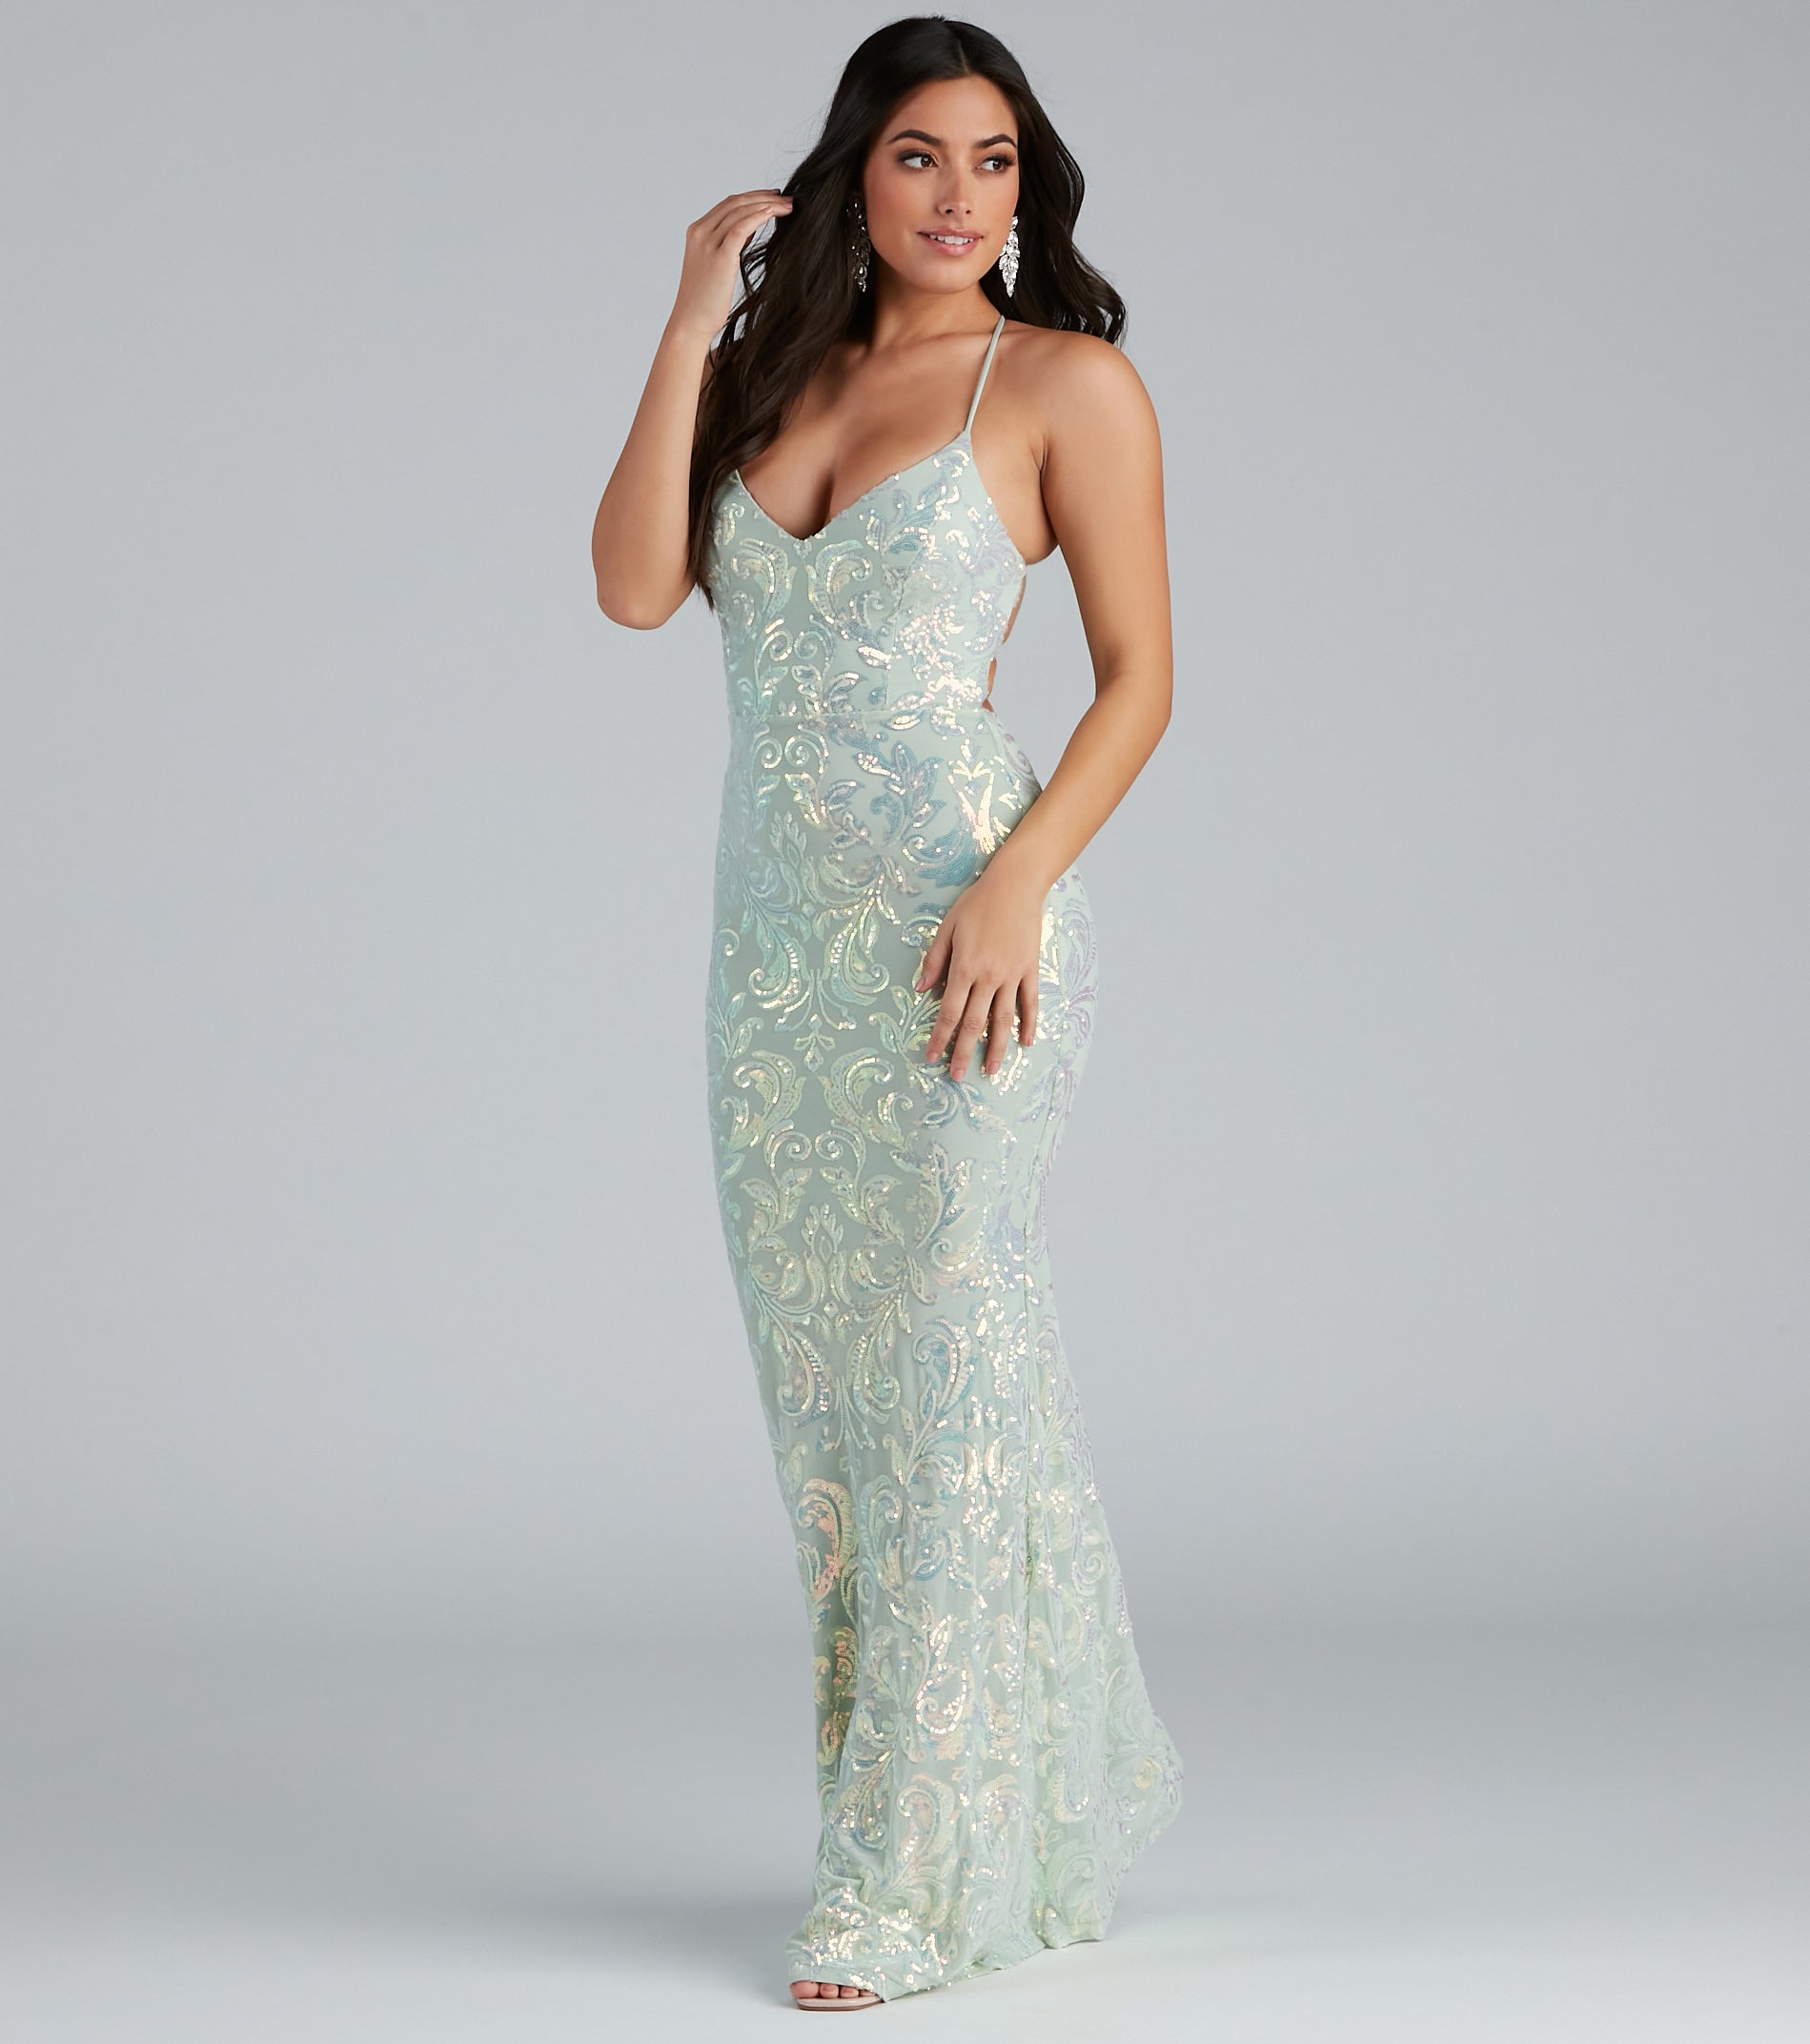 Christal Sequin Strappy Mermaid Formal Dress